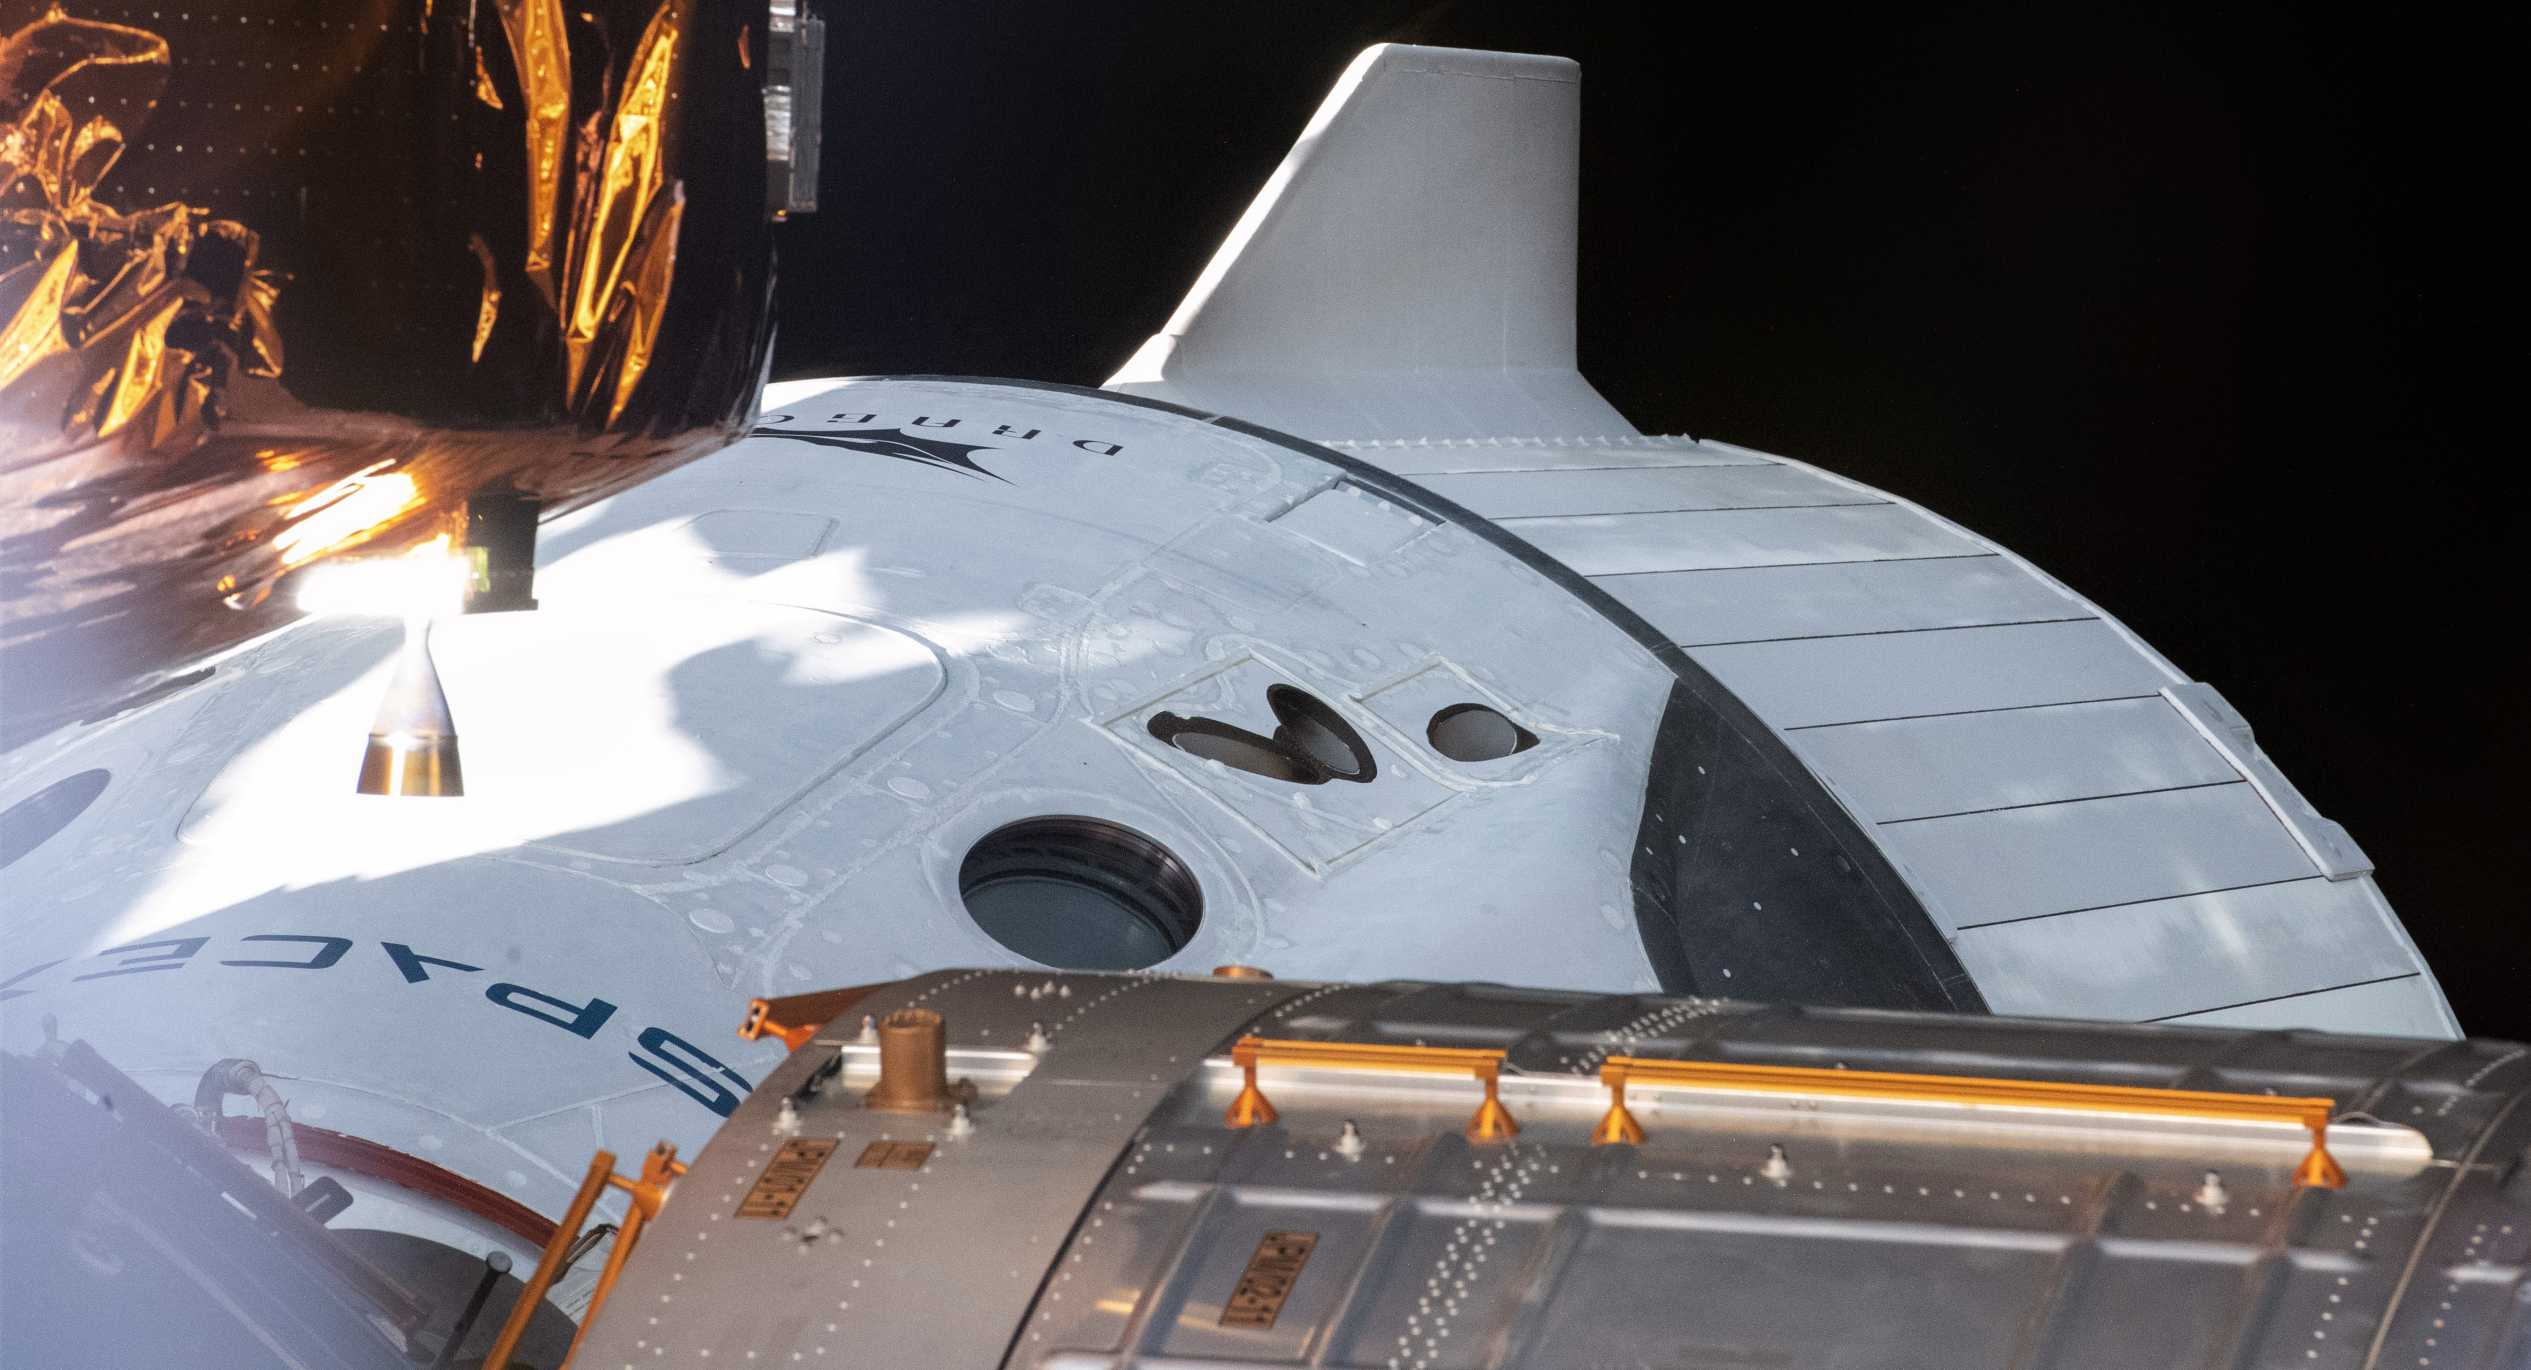 NASA Commercial Crew Manager says SpaceX's Crew Dragon is 'doing extremely well' at the Space Station